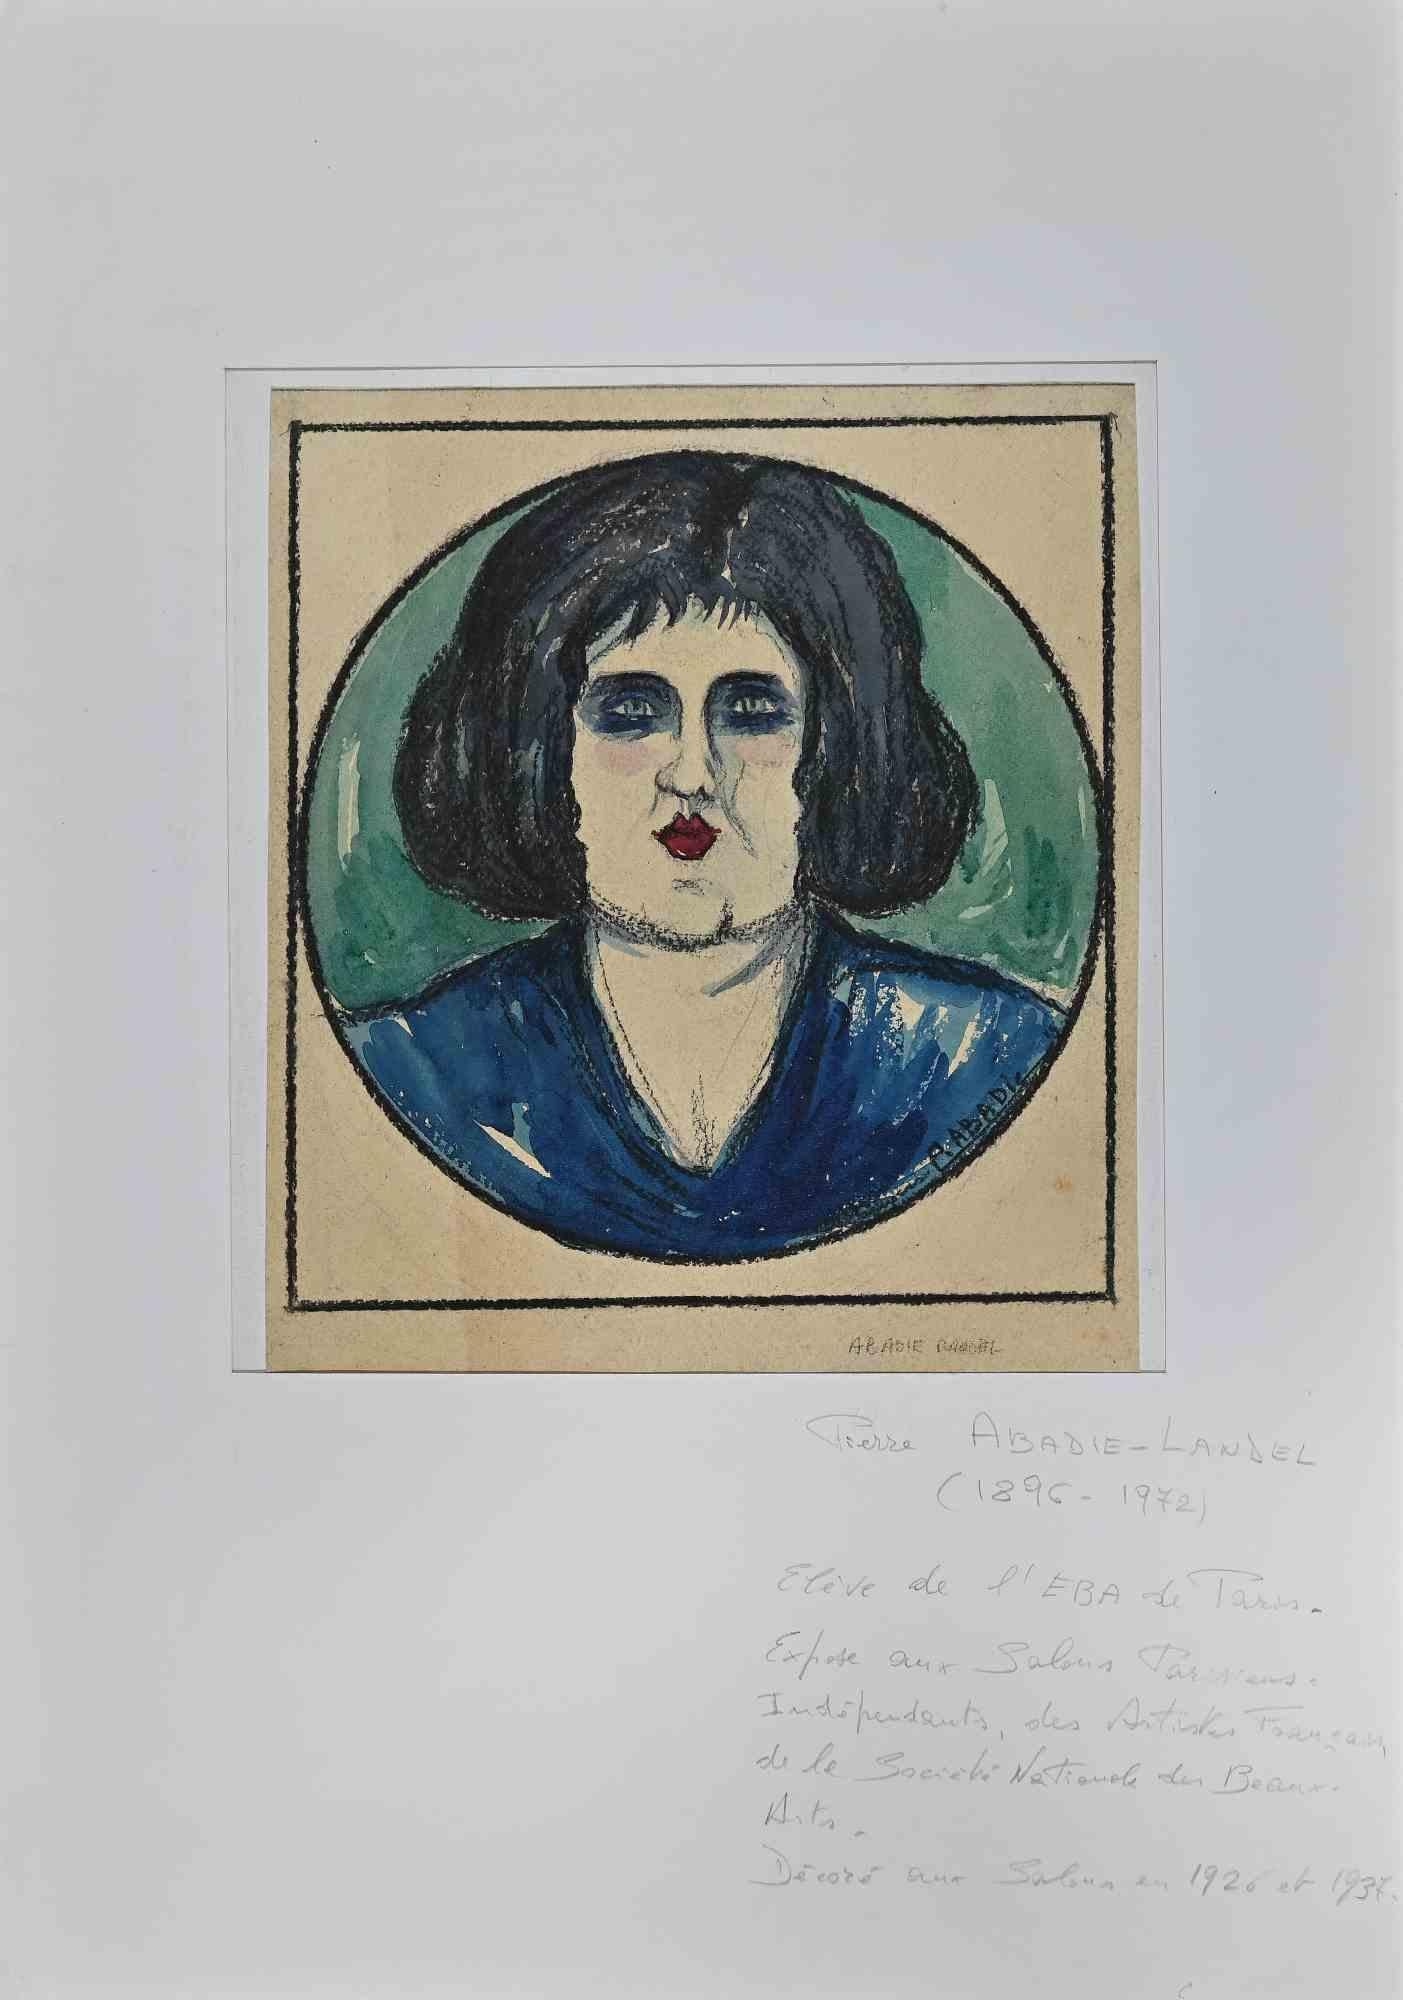 Portrait is a Pencil Drawing and Watercolour realized by Pierre Abadie-Landel (1896-1972).

Good condition on a yellowed paper, included a white cardboard passpartout (50x35 cm).

Hand signed by the artist on the lower right corner.

Pierre